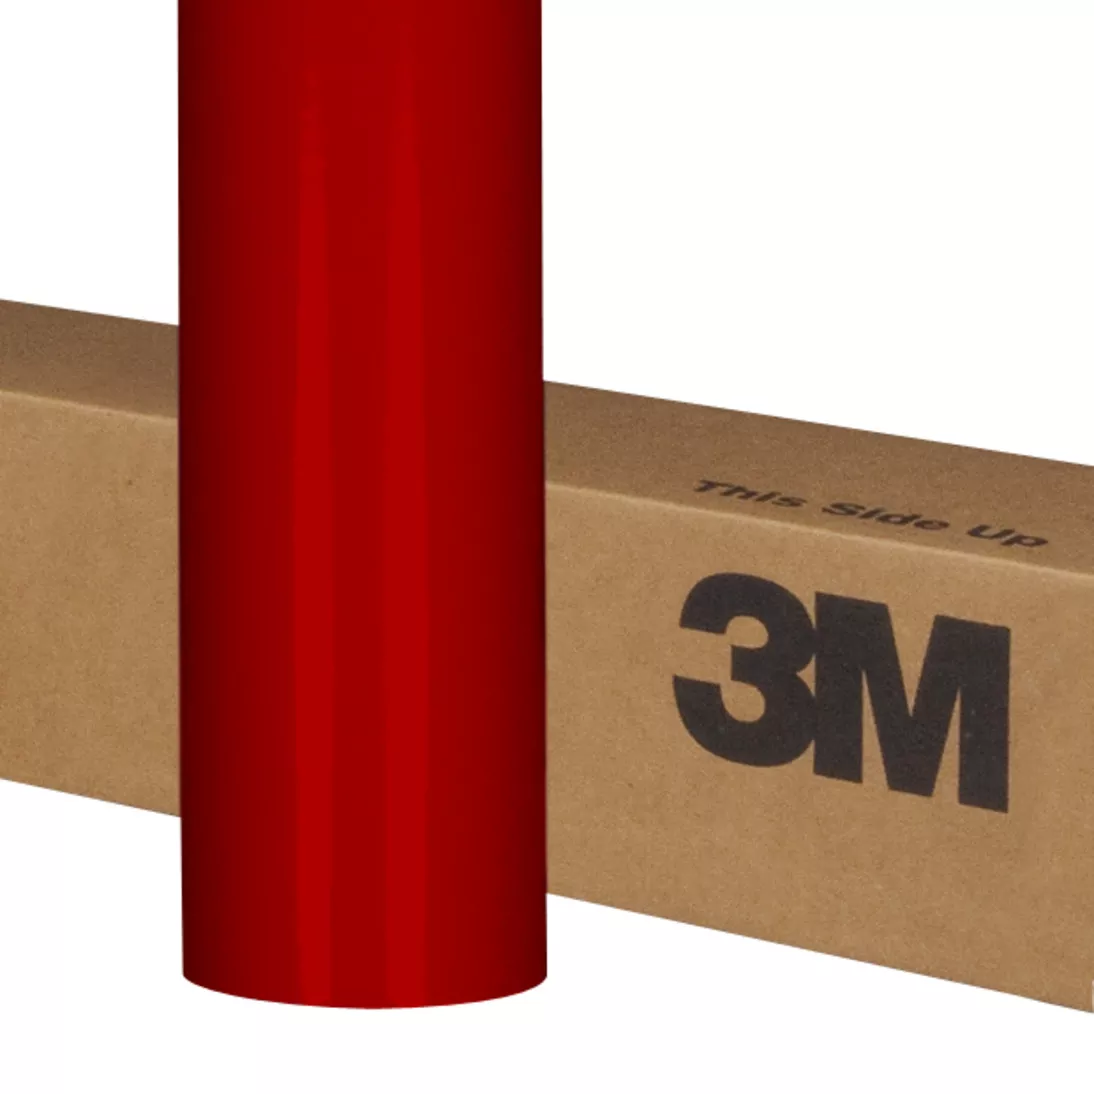 3M™ Scotchcal™ Translucent Graphic Film 3630-1473, Cranberry, 48 in x 50
yd